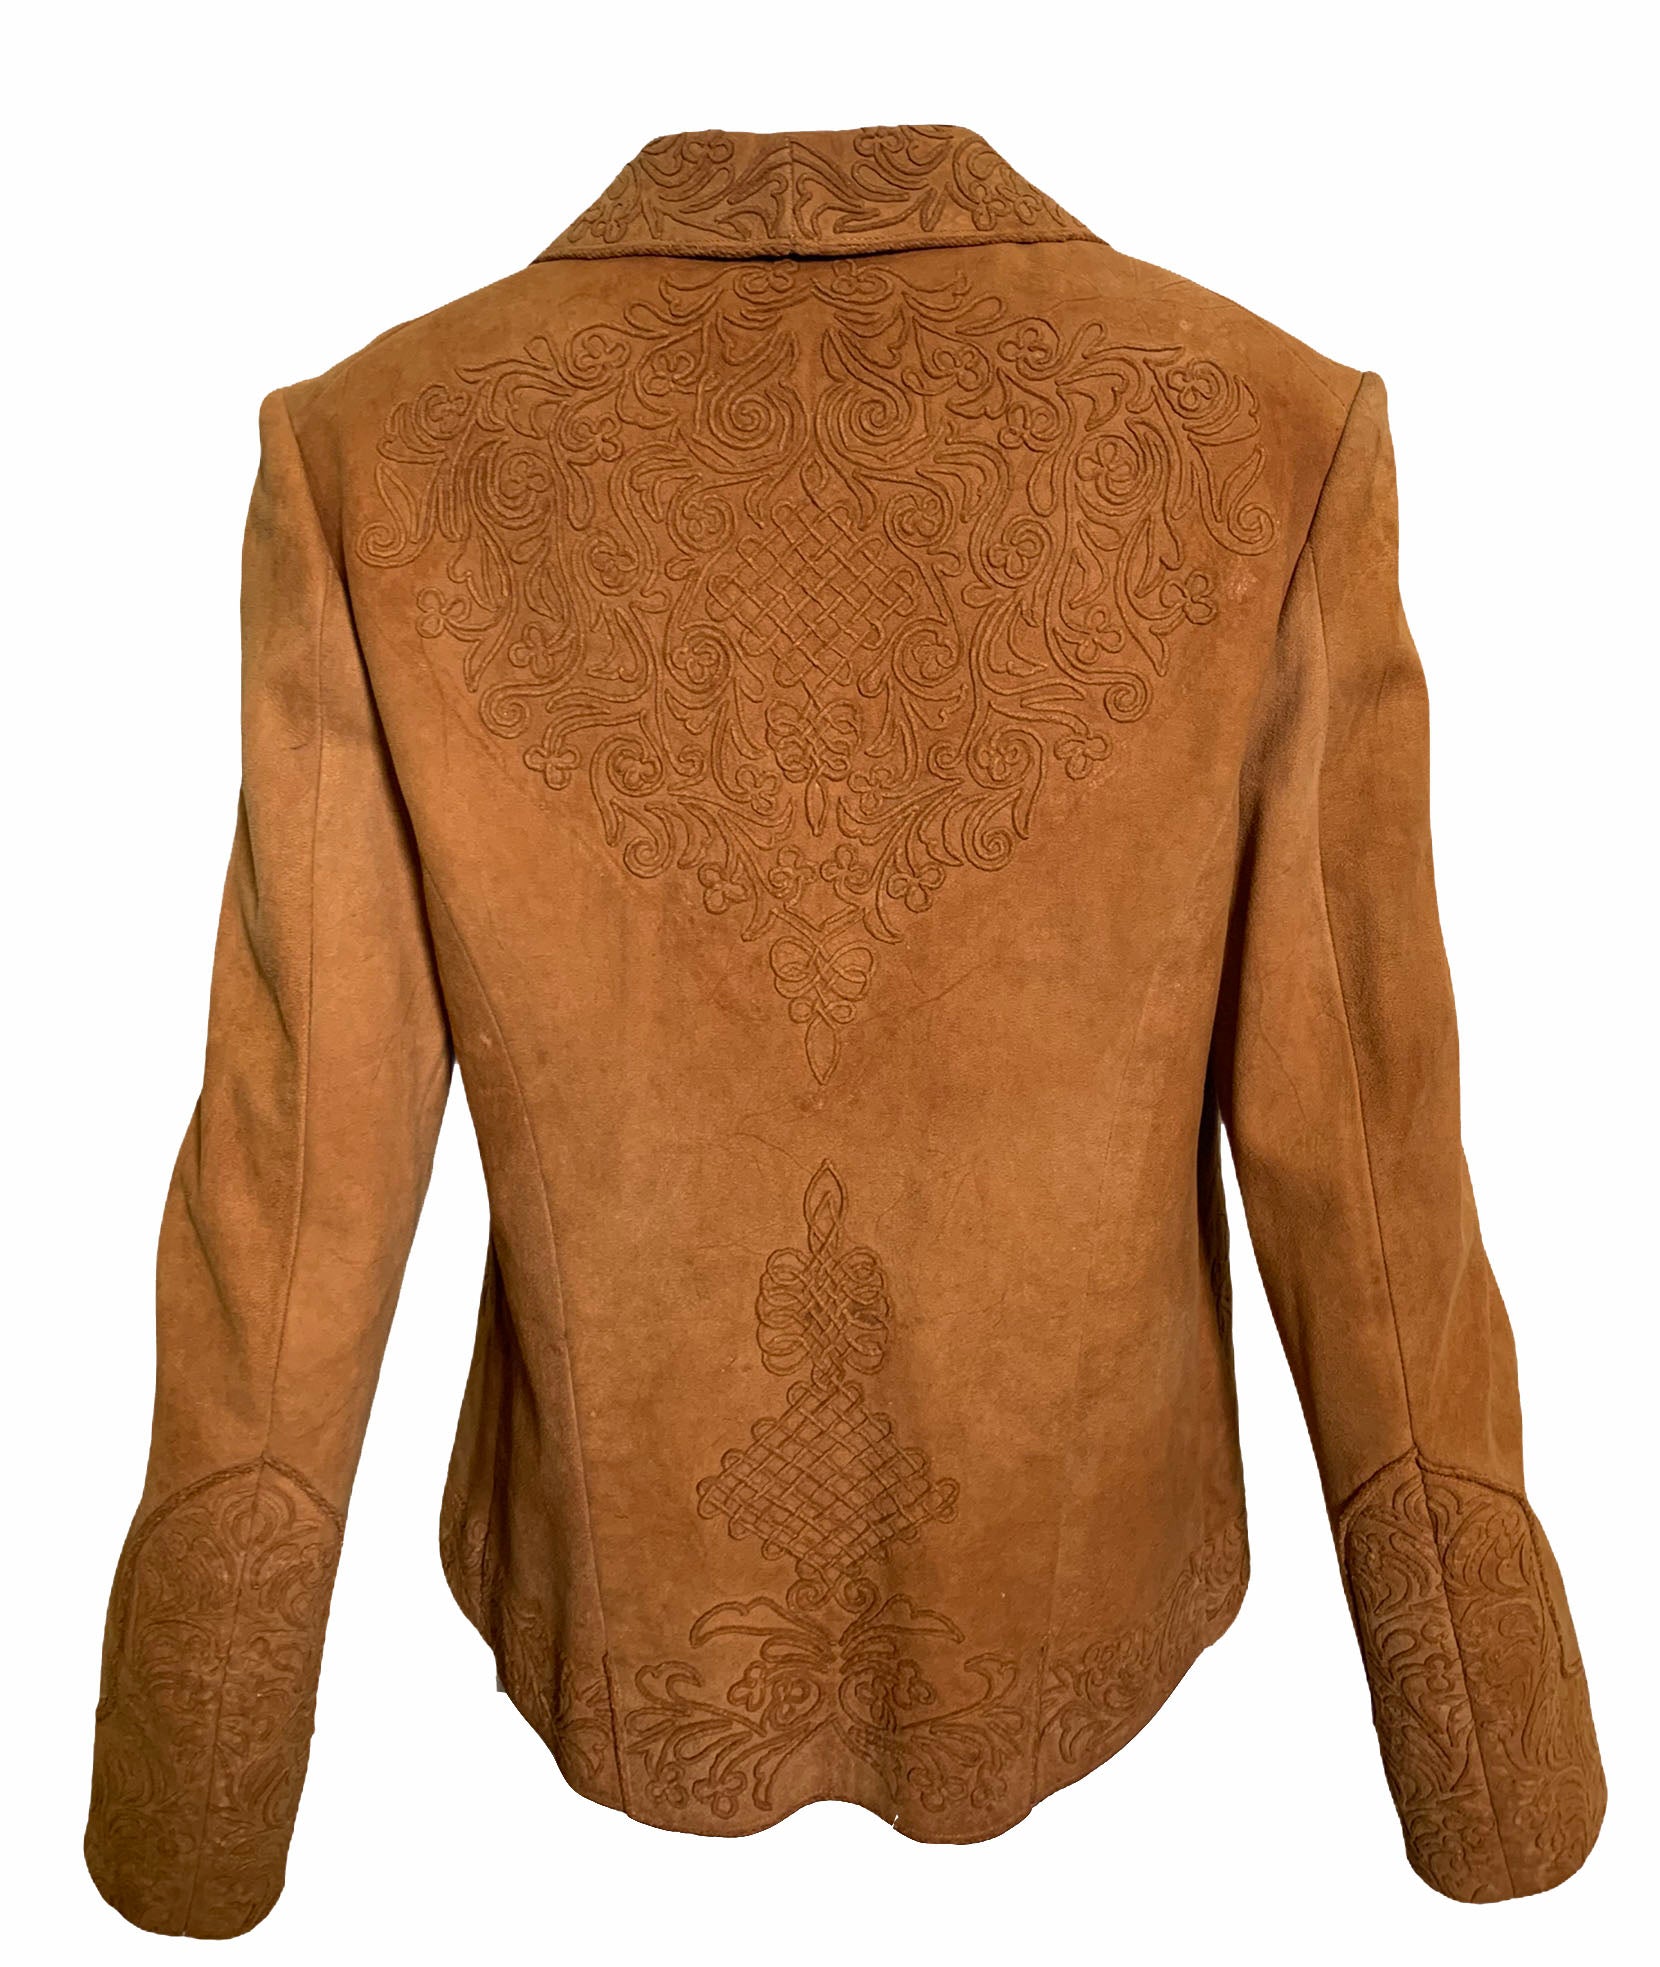 Argentinian 40s Tan Suede Jacket with Couched Trim  BACK 2 of 4